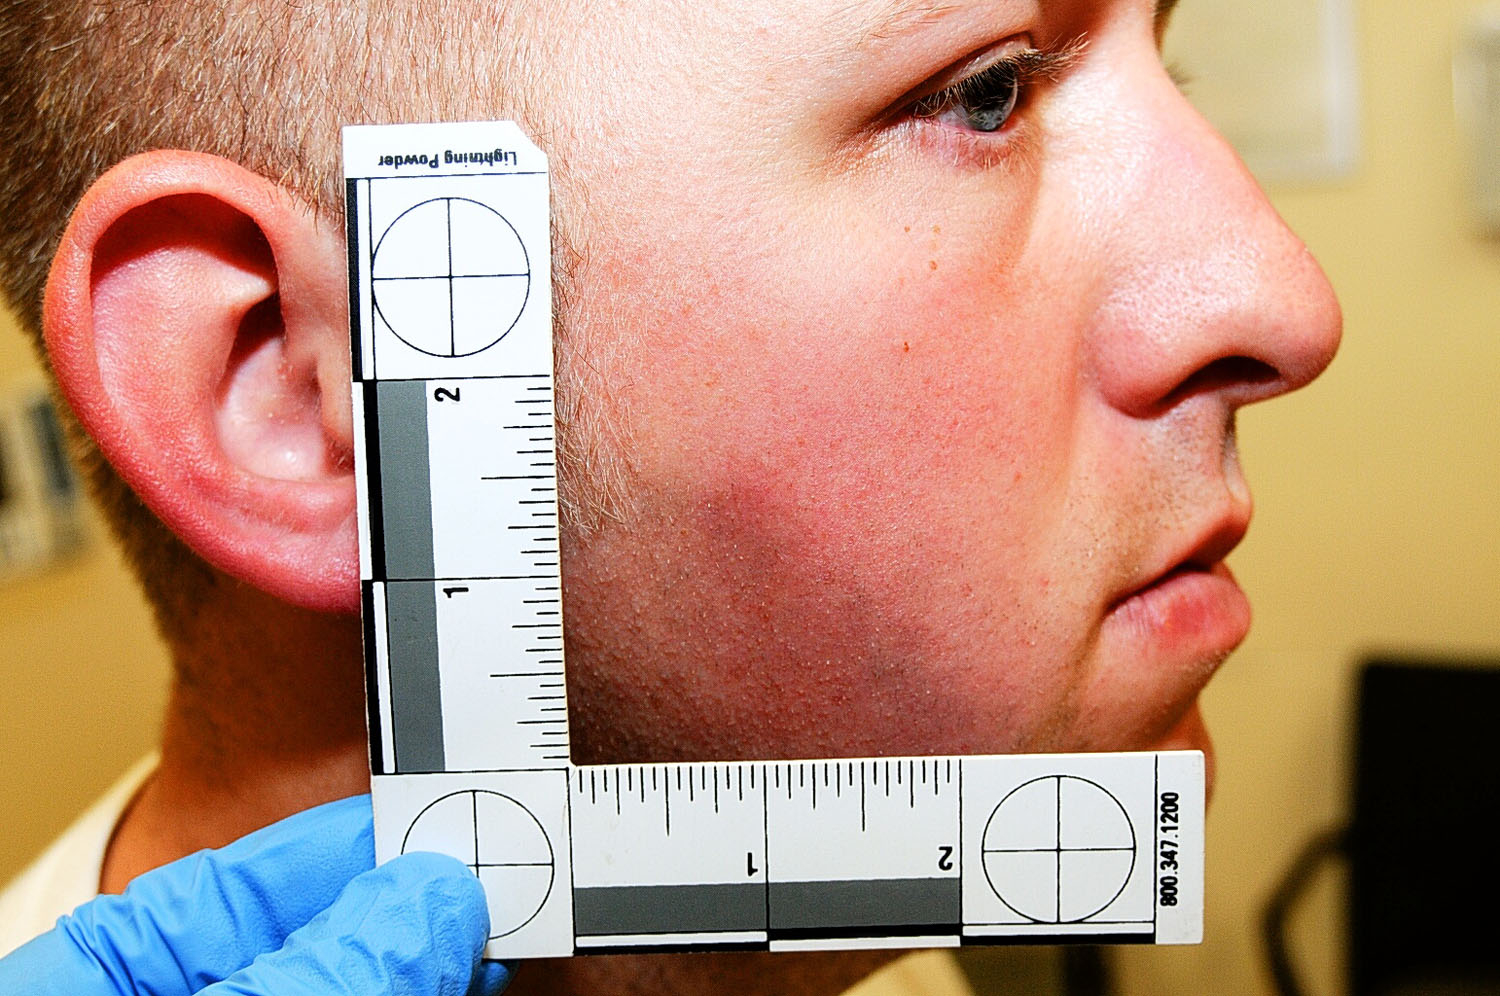 During the medical examination, bruising was discovered on Wilson's cheek where he says Brown punched him in the face (St. Louis County)